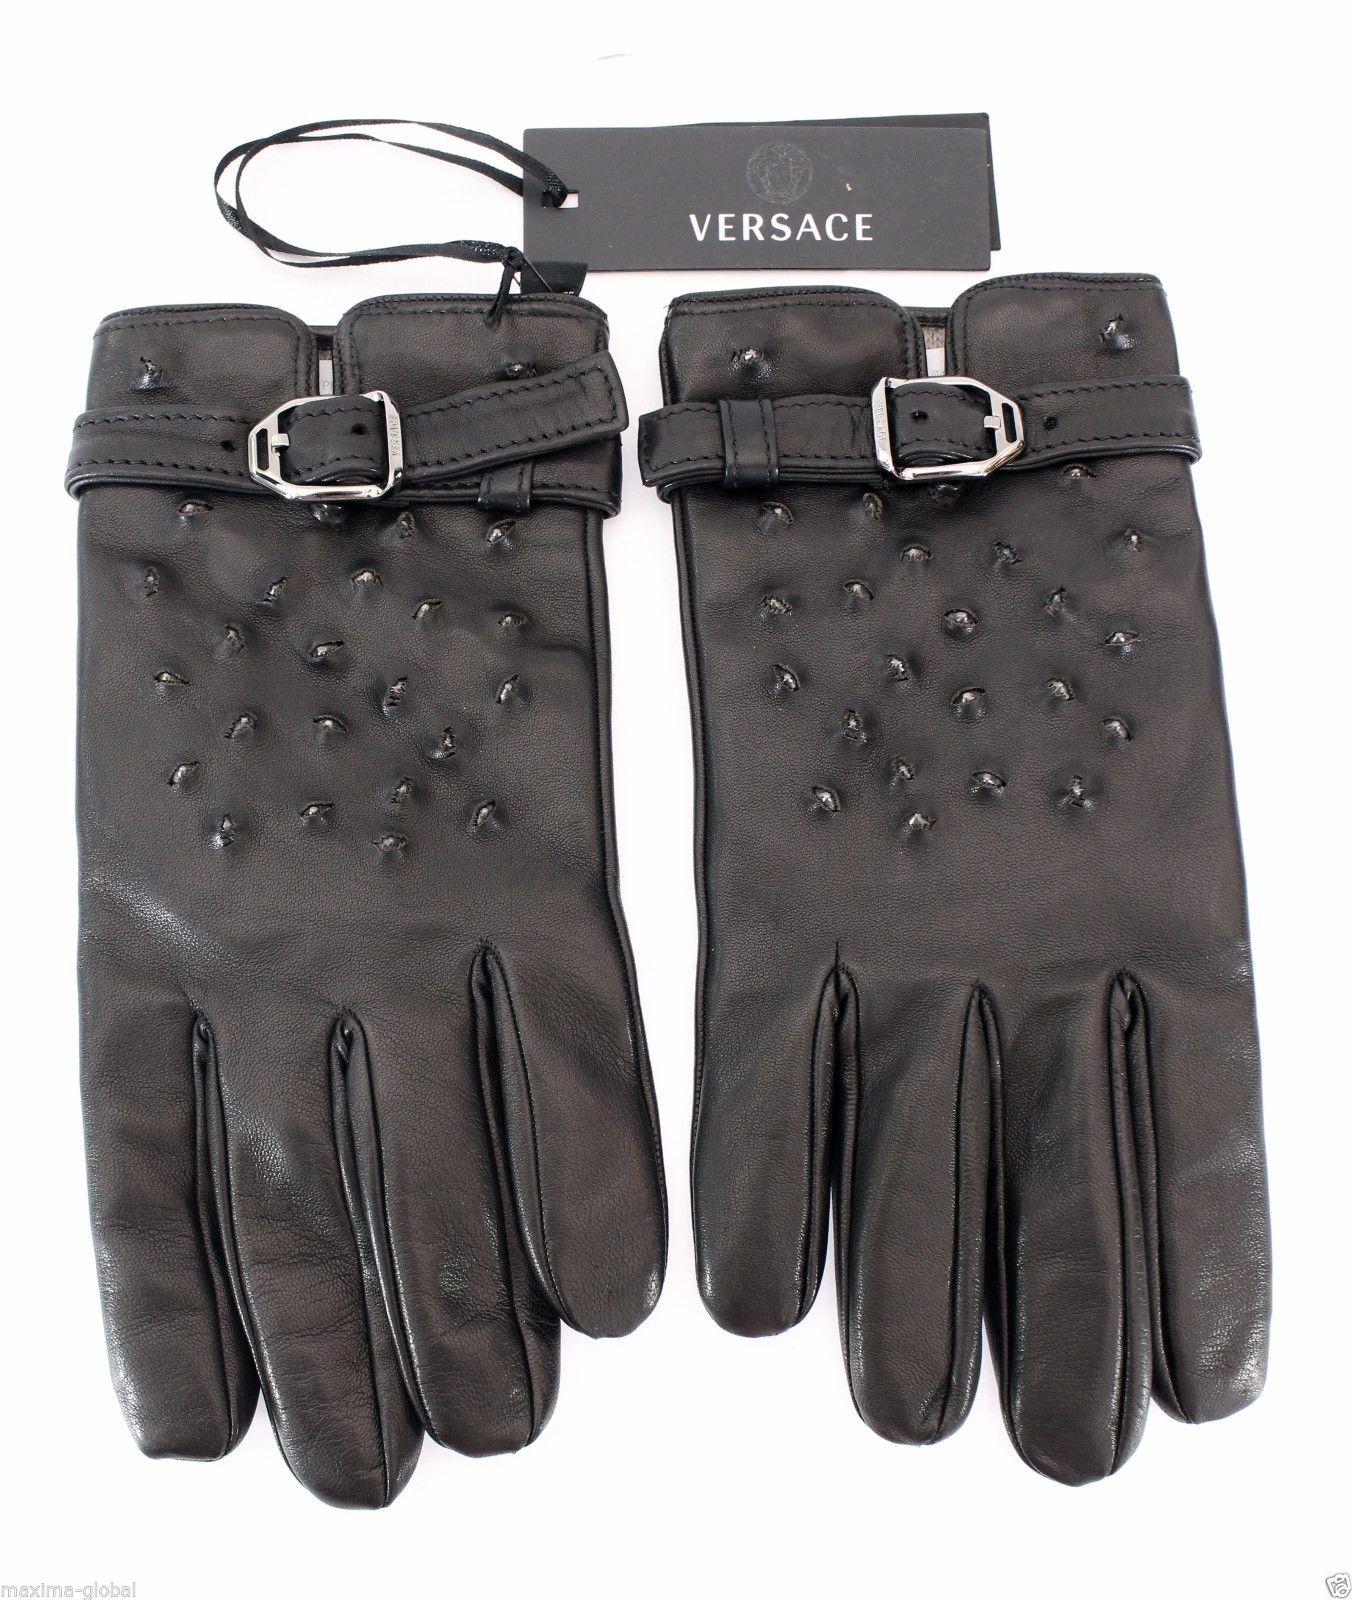 Versace gloves

This expertly handcrafted glove will add an element of luxurious Italian style to any outfit. 
In luxurious soft leather and classic black color, finished with studs and cashmere lining.

Made in Italy

New, with tags

Size L

Don't